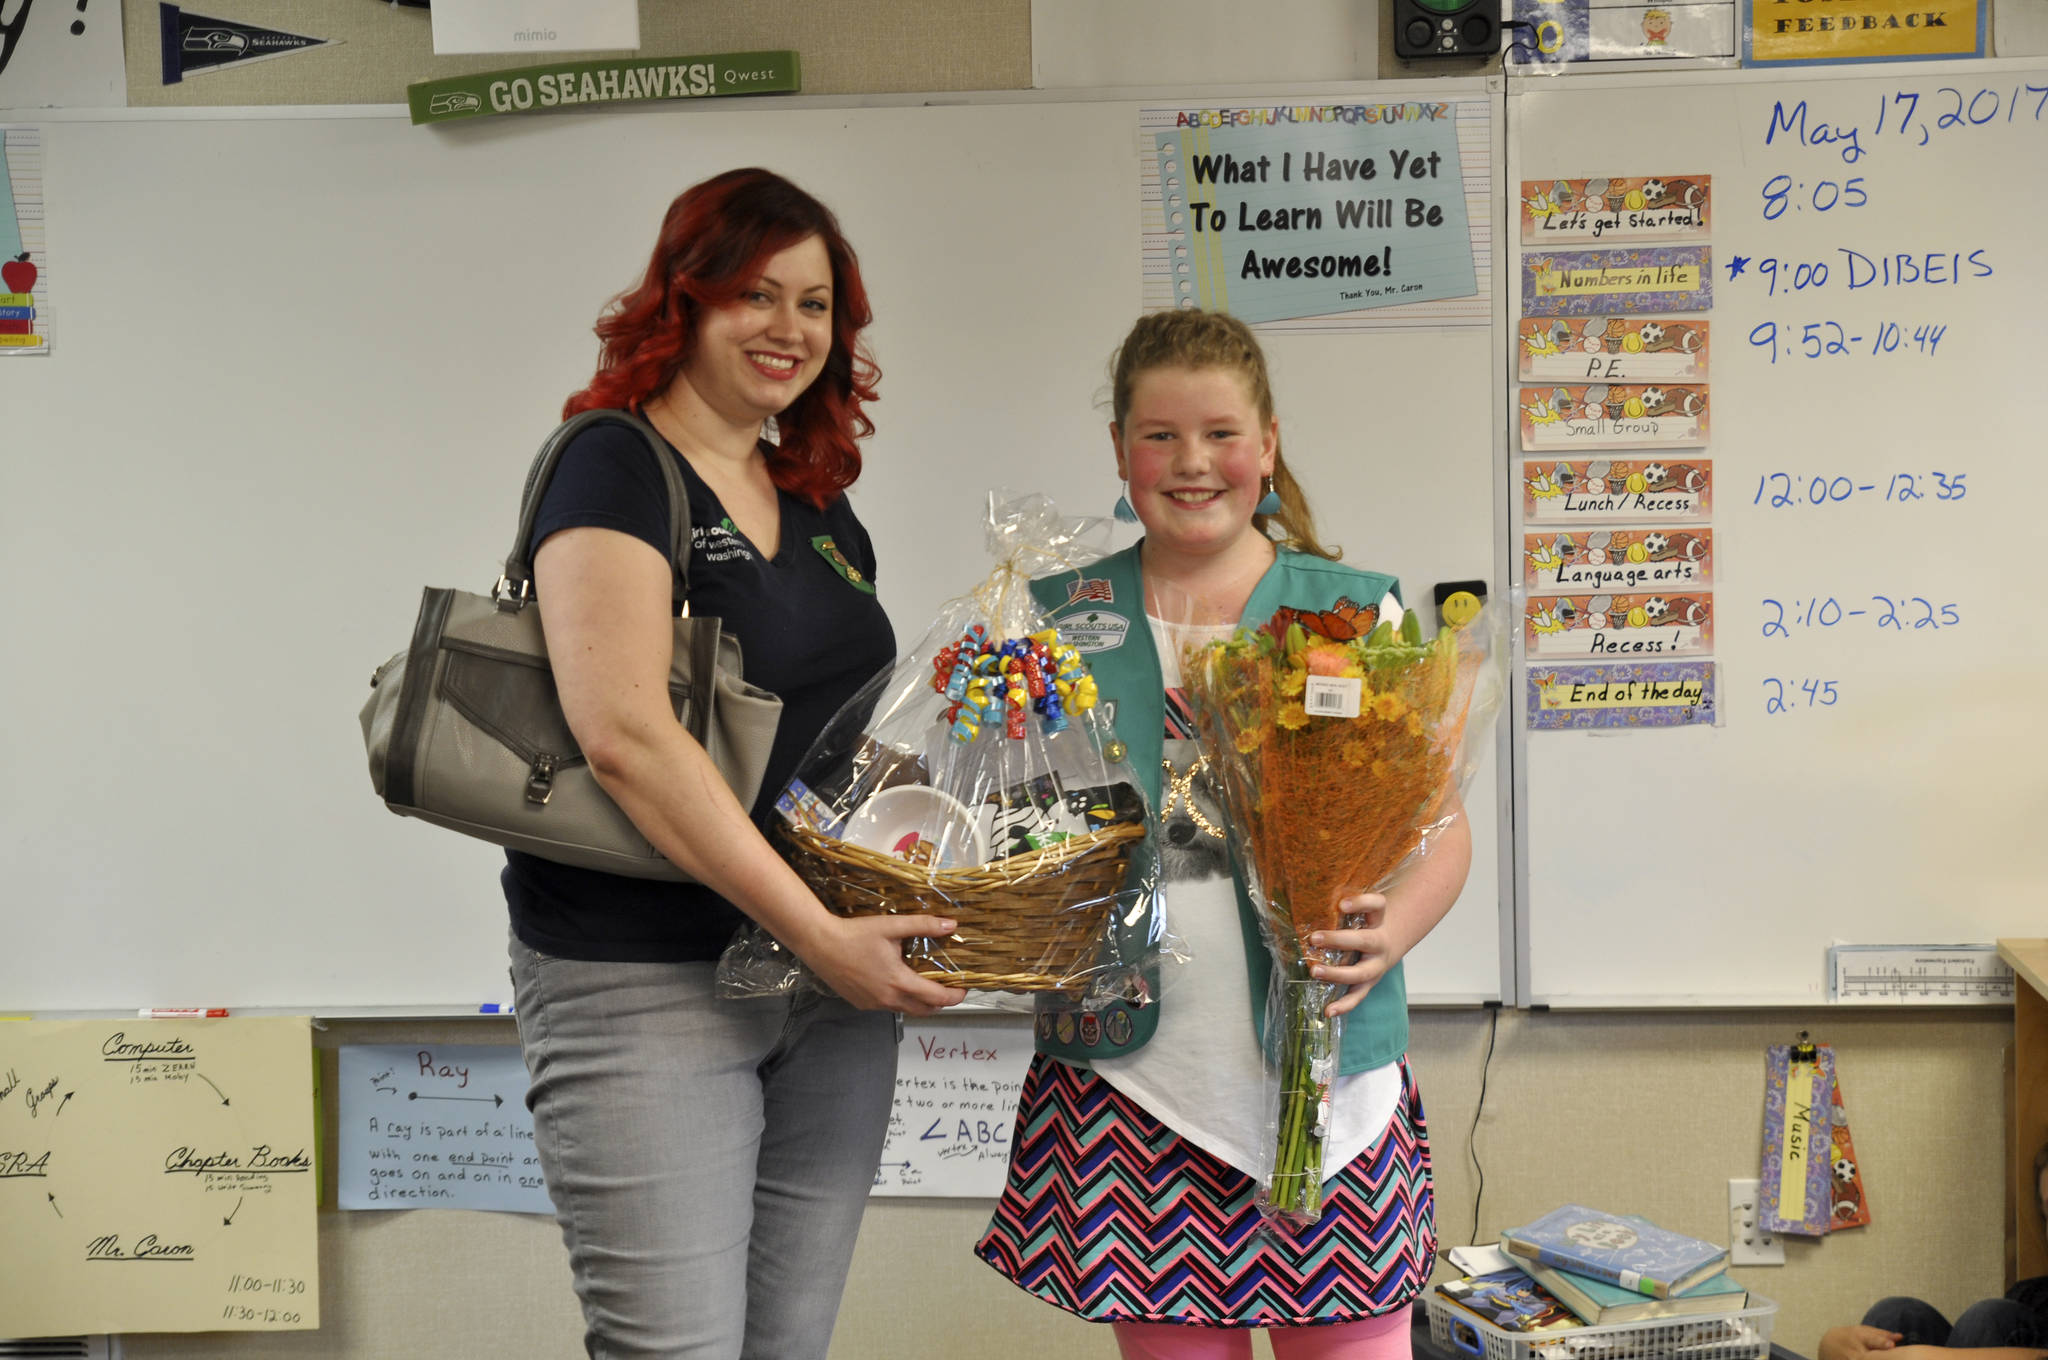 Laurel Arnau, product program manger for the Girl Scouts of the Olympic Peninsula, surprises Paige Krzyworz on May 17 in her fourth-grade classrom with news she is the highest selling Girl Scout cookie salesperson on the Olympic Peninsula and No. 2 in Western Washington. She’ll receive a ride in a limousine with the Girls Scouts of Western Washington’s CEO and a fancy dinner among many other goodies later this month for selling more than 3,000 boxes of cookies. Sequim Gazette photo by Matthew Nash